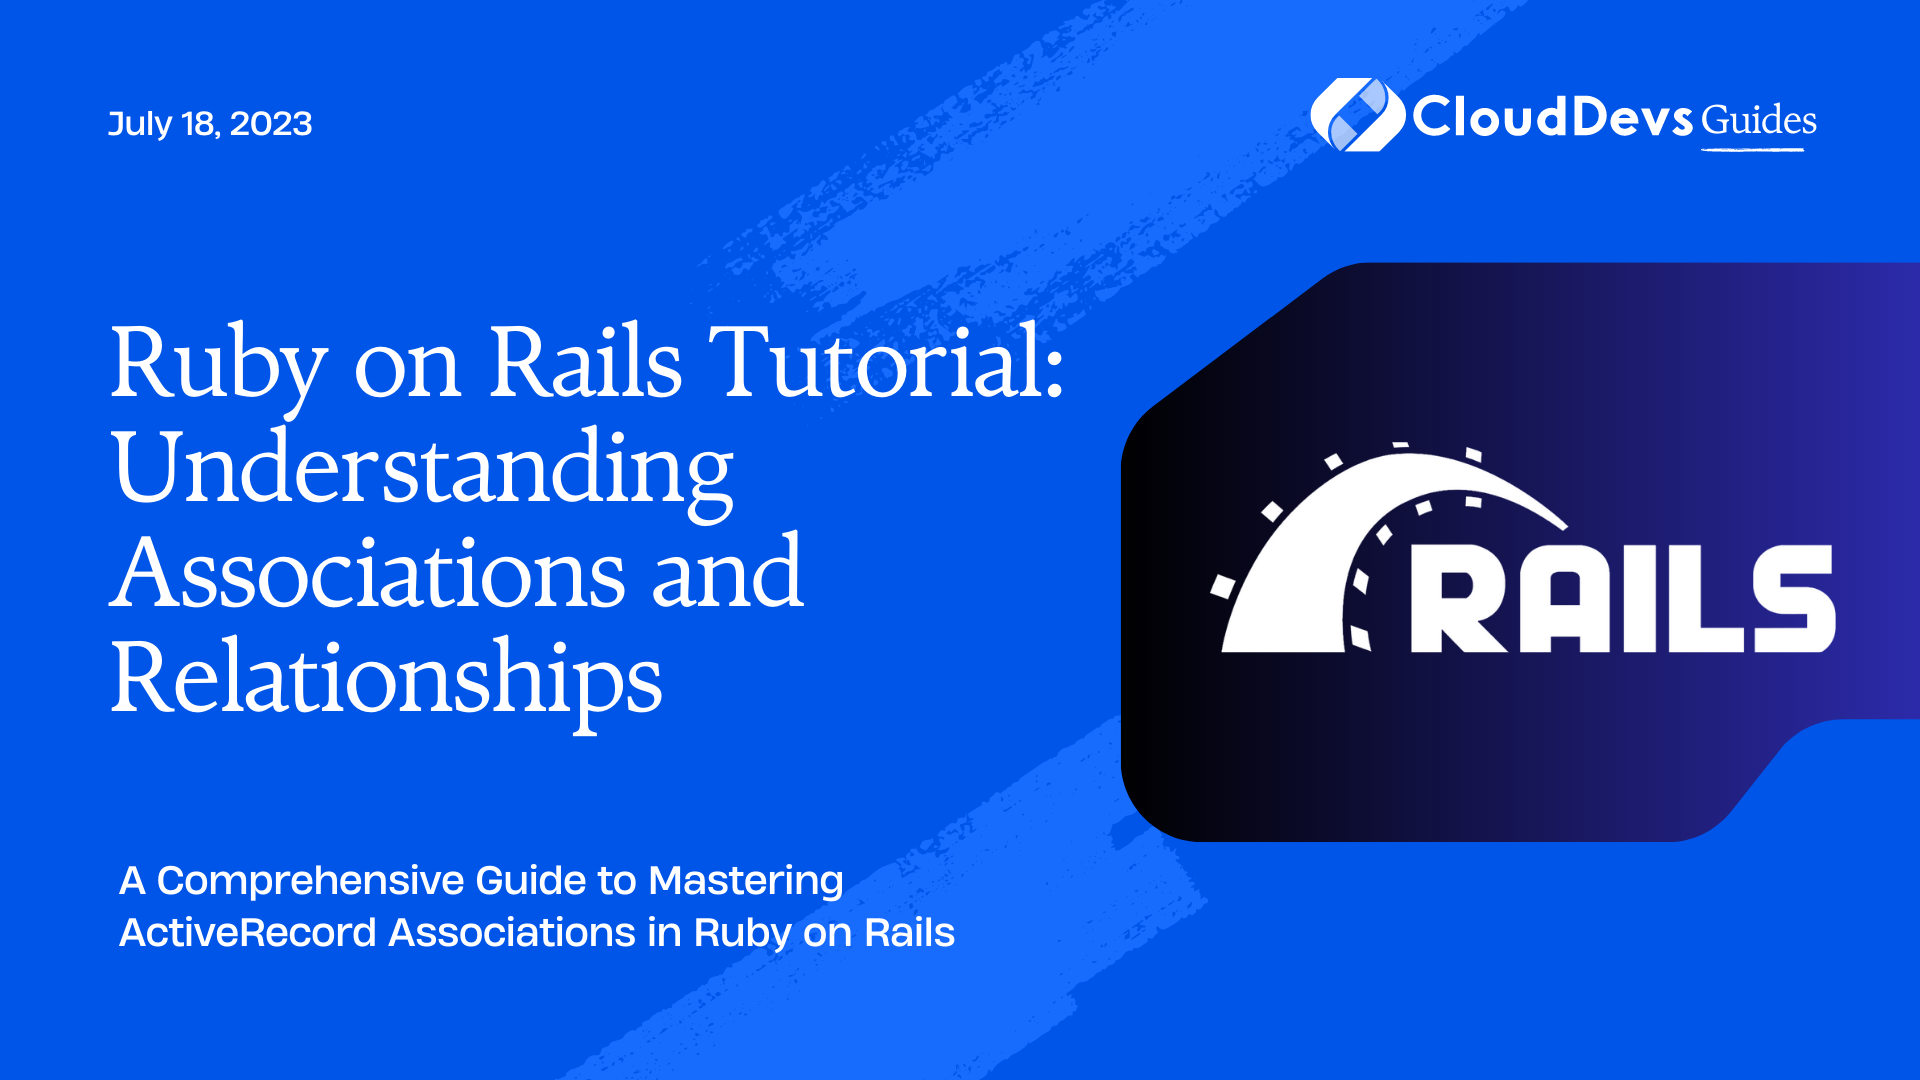 Ruby on Rails Tutorial: Understanding Associations and Relationships